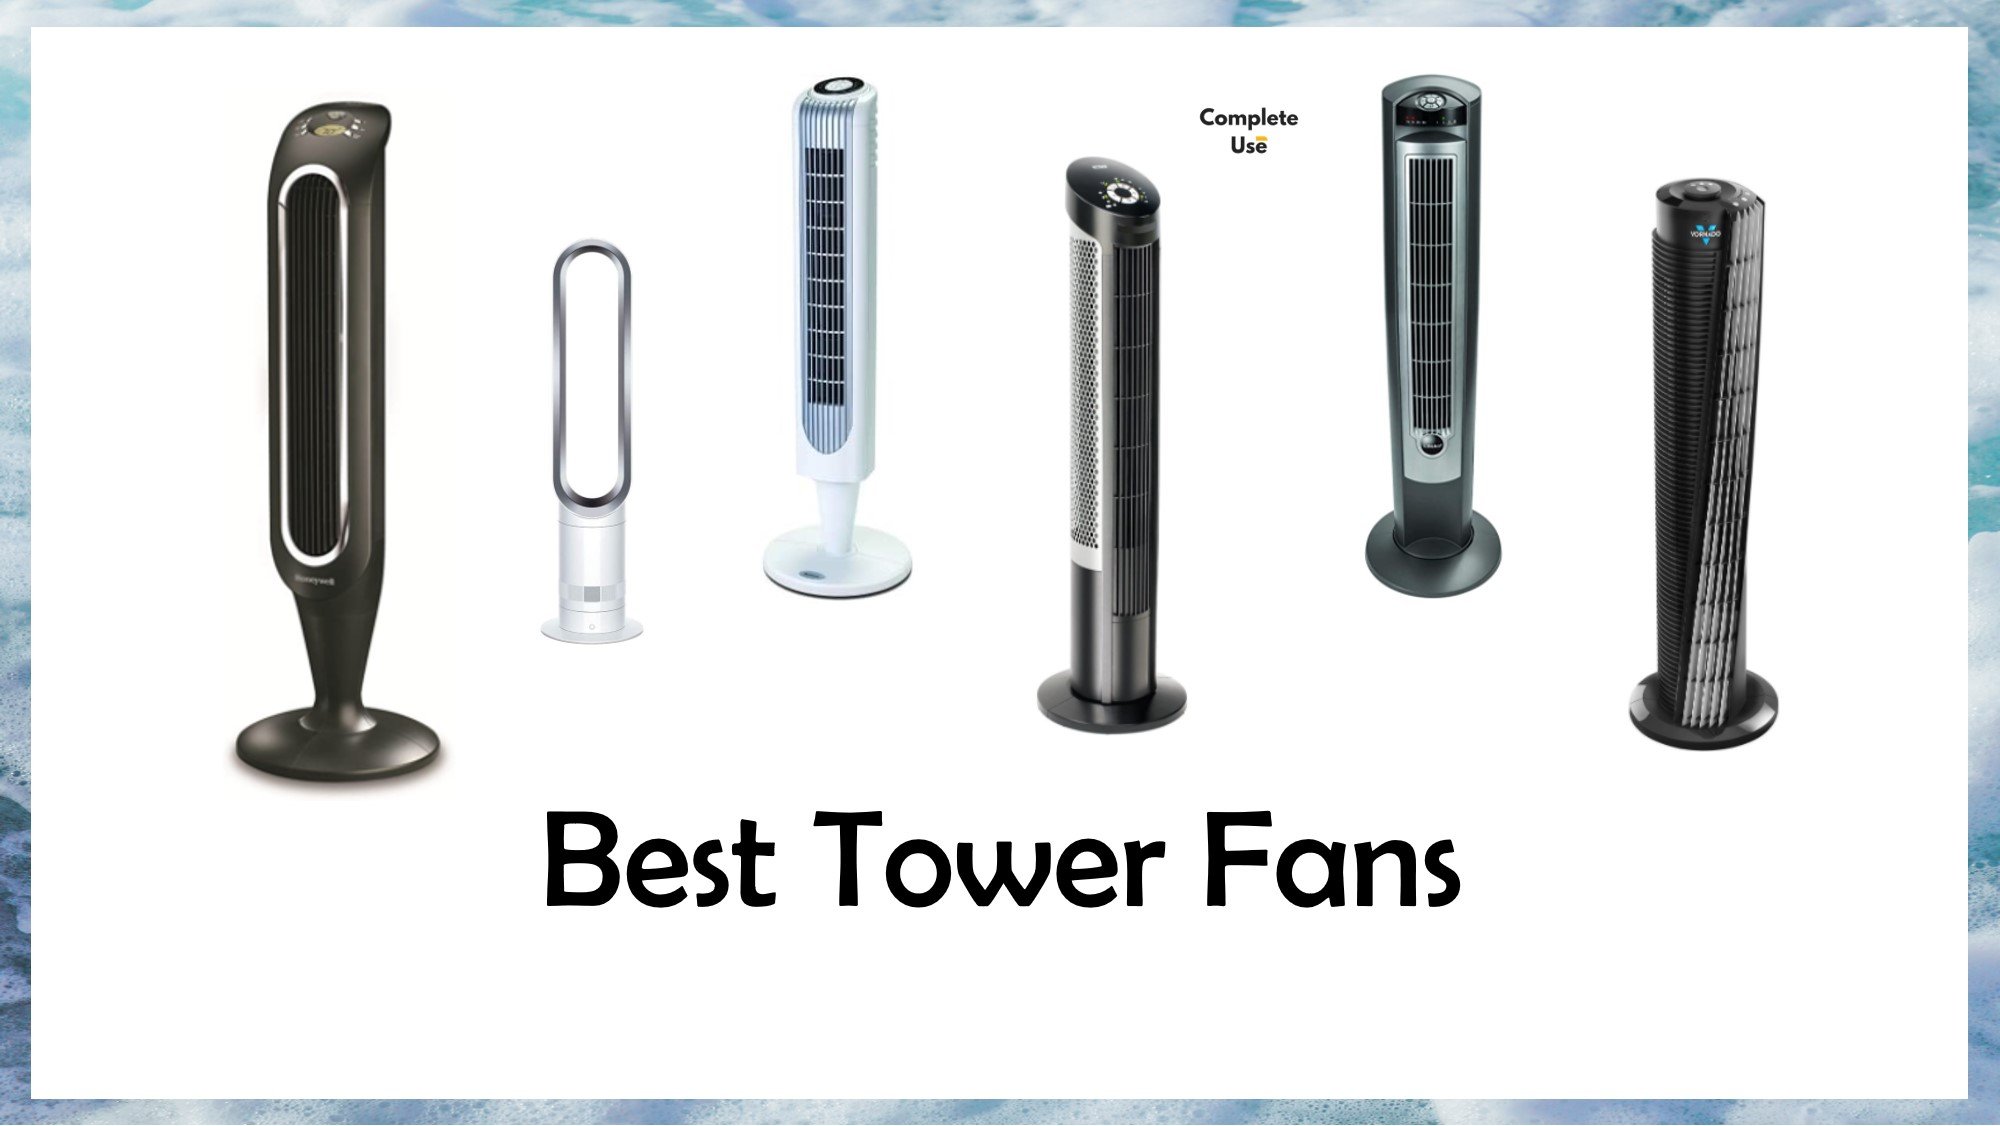 The Best Tower Fans According to Reddit Users